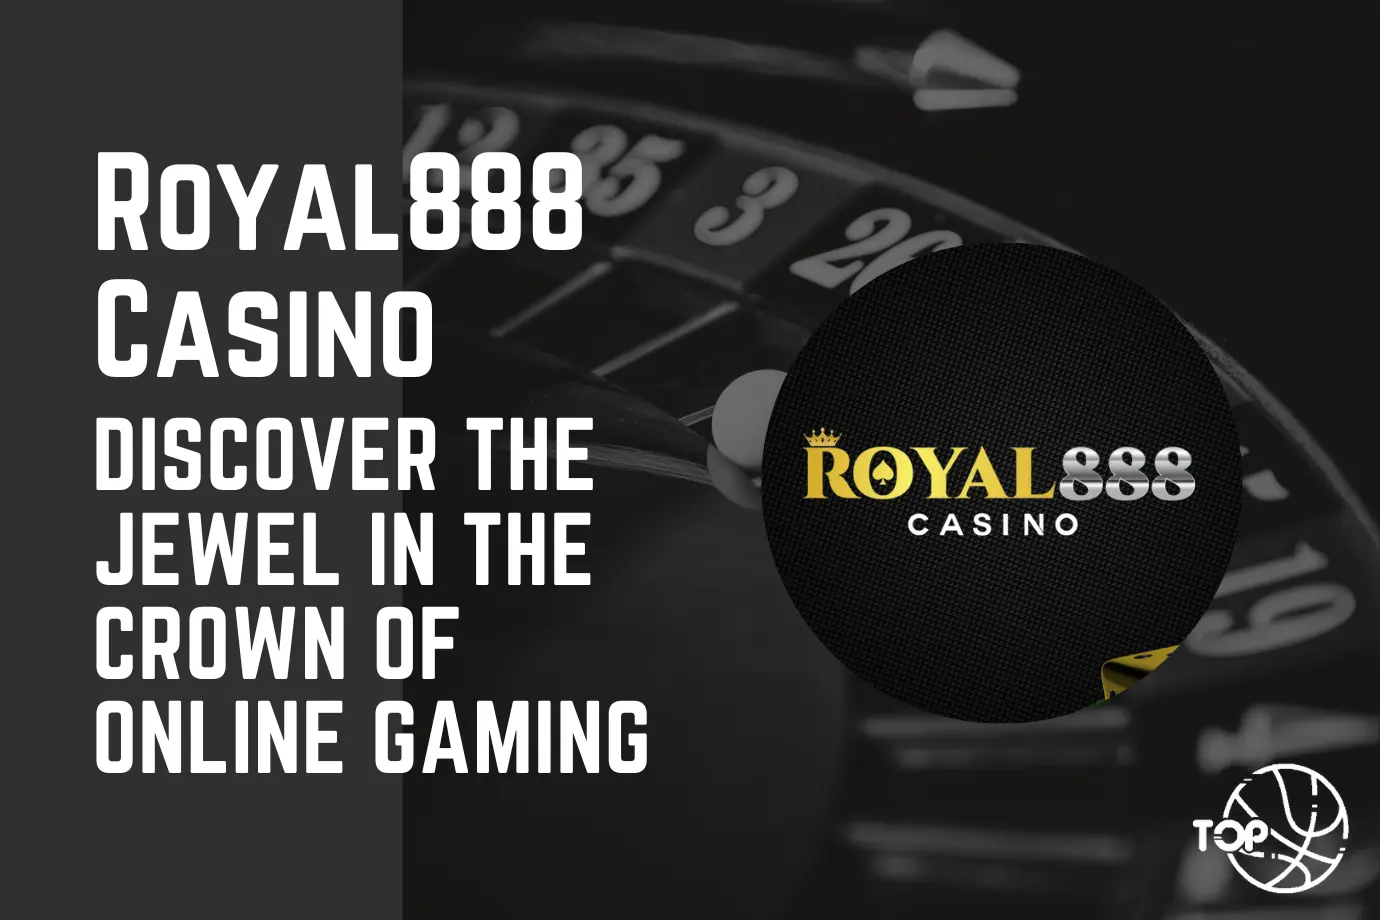 Royal888 Casino: Discover the Jewel in the Crown of Online Gaming